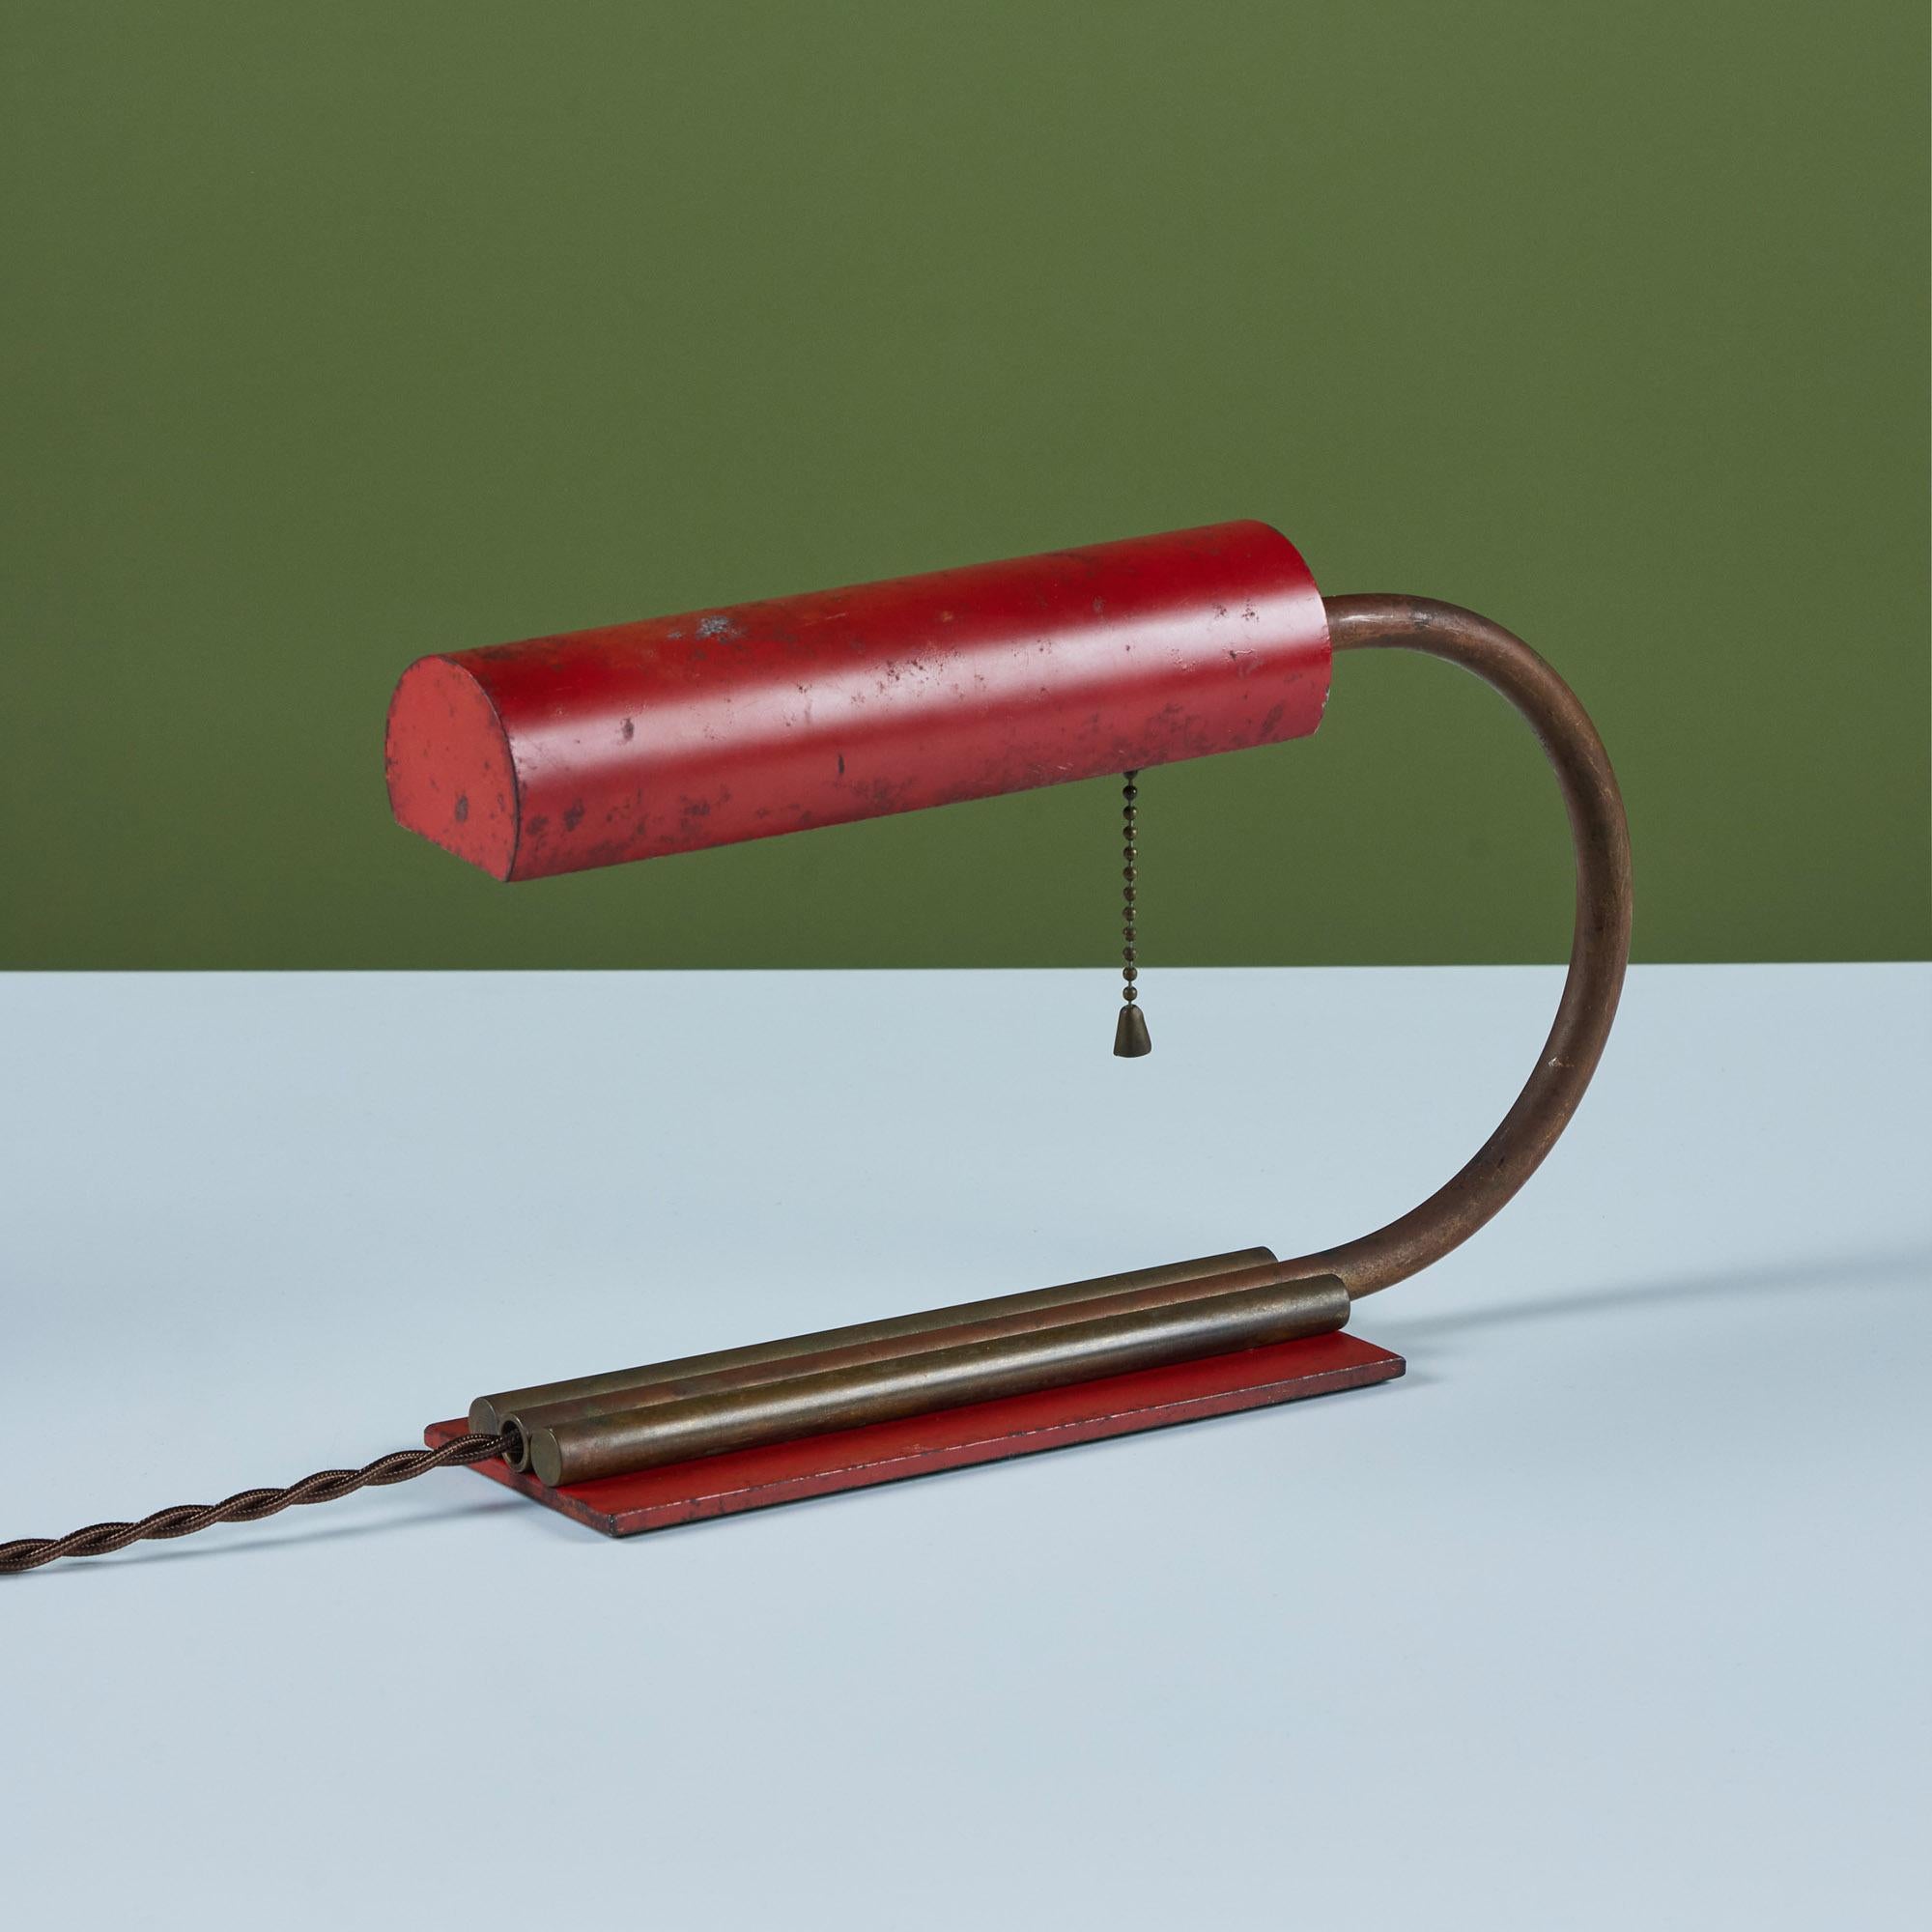 Petite art deco enameled desk or table lamp in the style of Gilbert Rohde, c.1930s. The lamp features a red enameled cylindrical pivoting shade. The brass curved stem of the lamp connects to the rectangular enameled base and is flanked by two brass